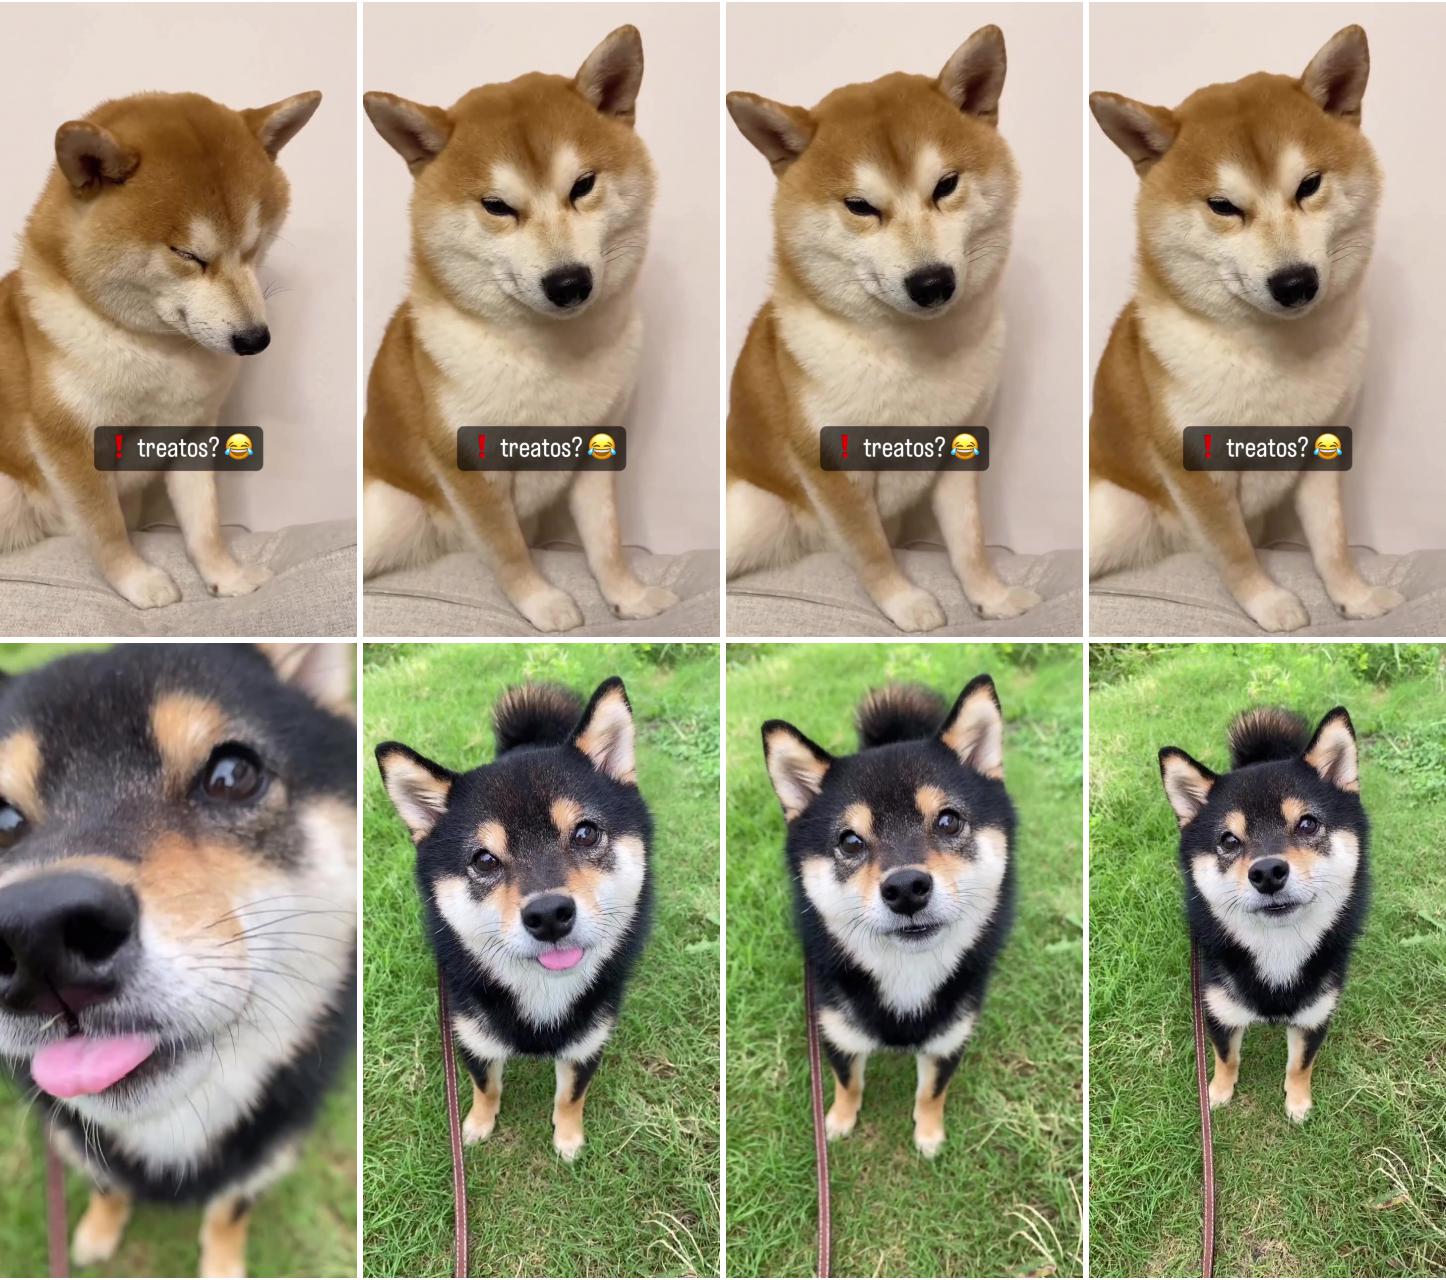 Hilariously funny: deeply sleeping shiba inu puppy gets startled - adorable moments of surprise ; charming shiba inu puppy's adorable camera encounter: cute sniffs and smiles 